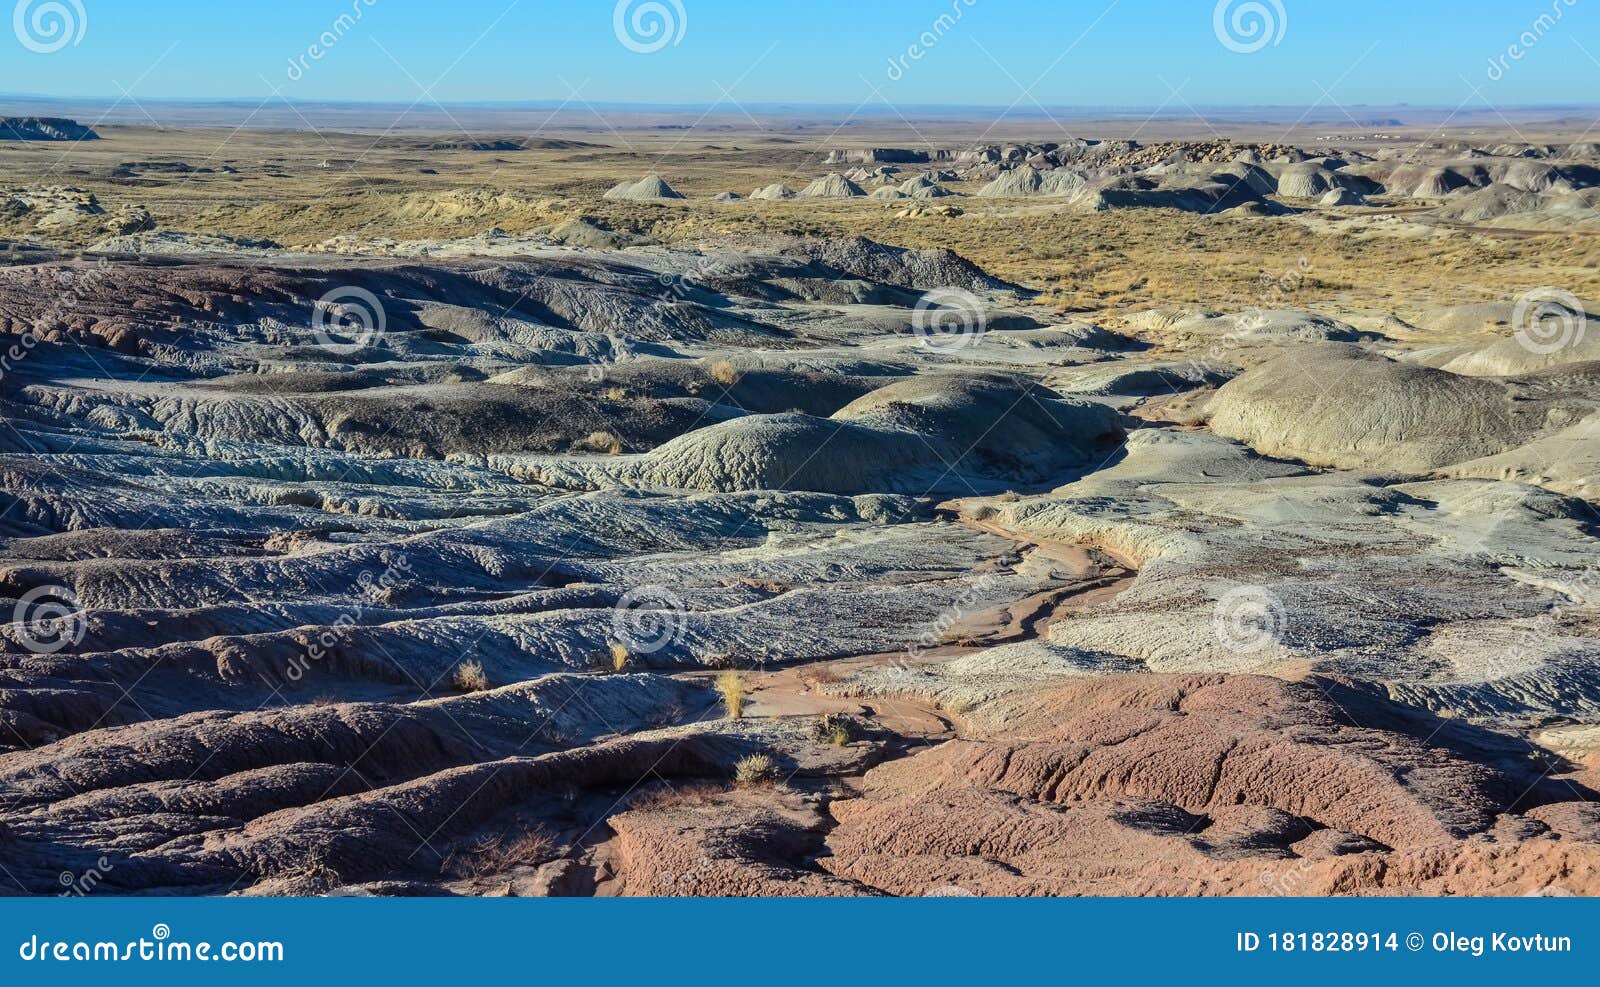 landscape, panorama of erosive multi-colored clay in petrified forest national park, arizona